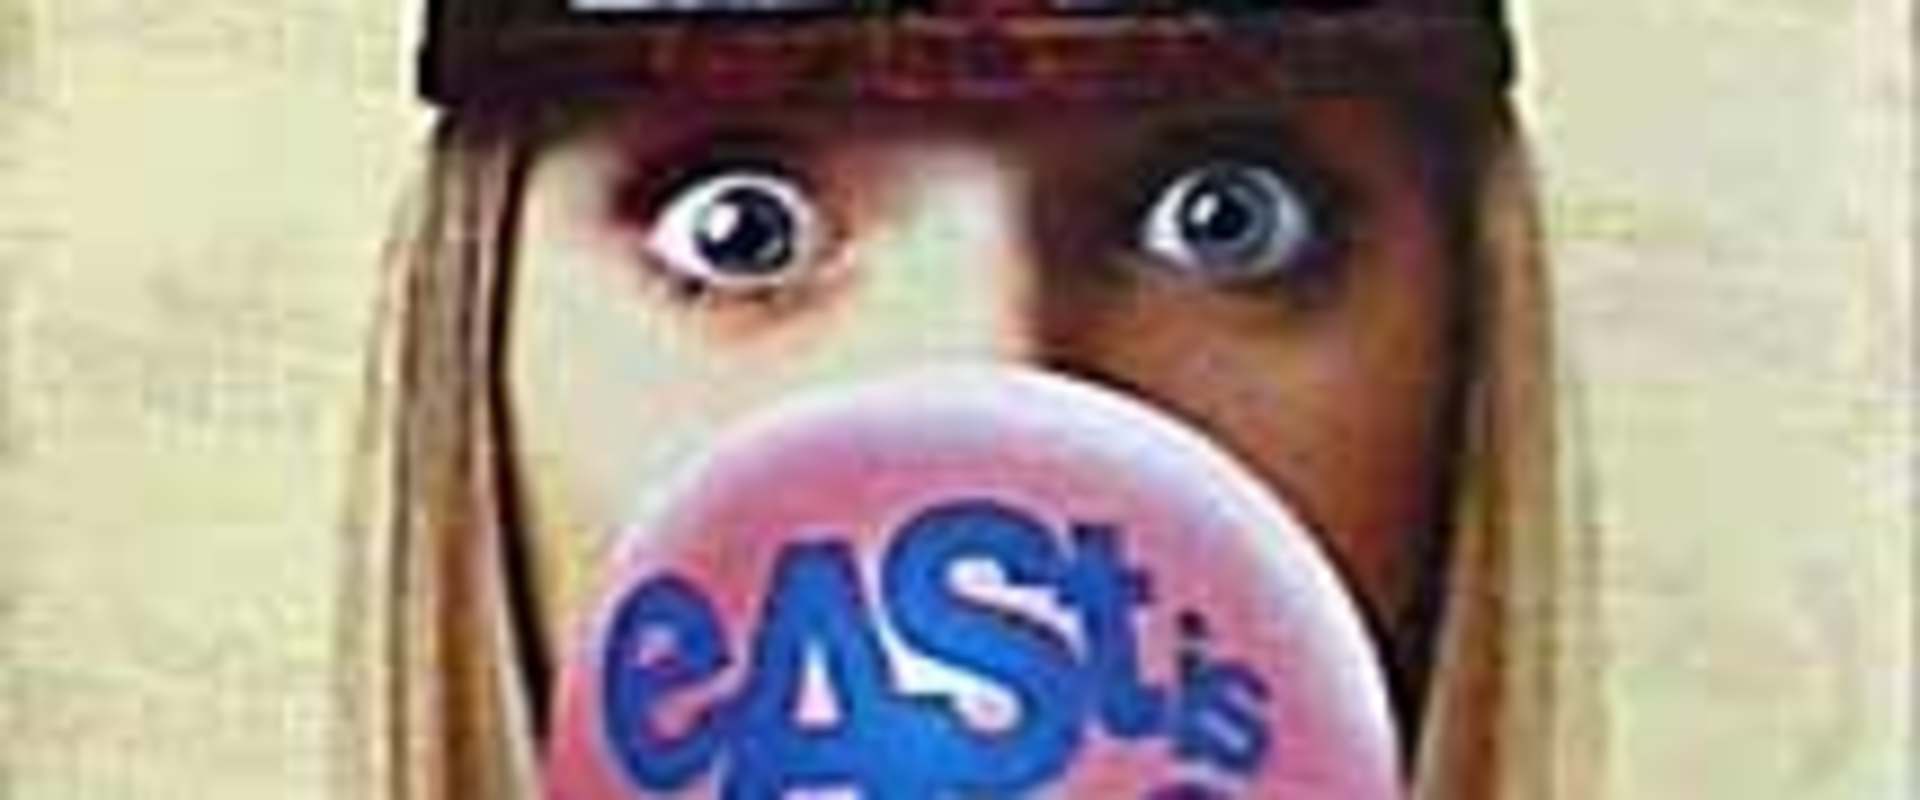 East Is East background 1